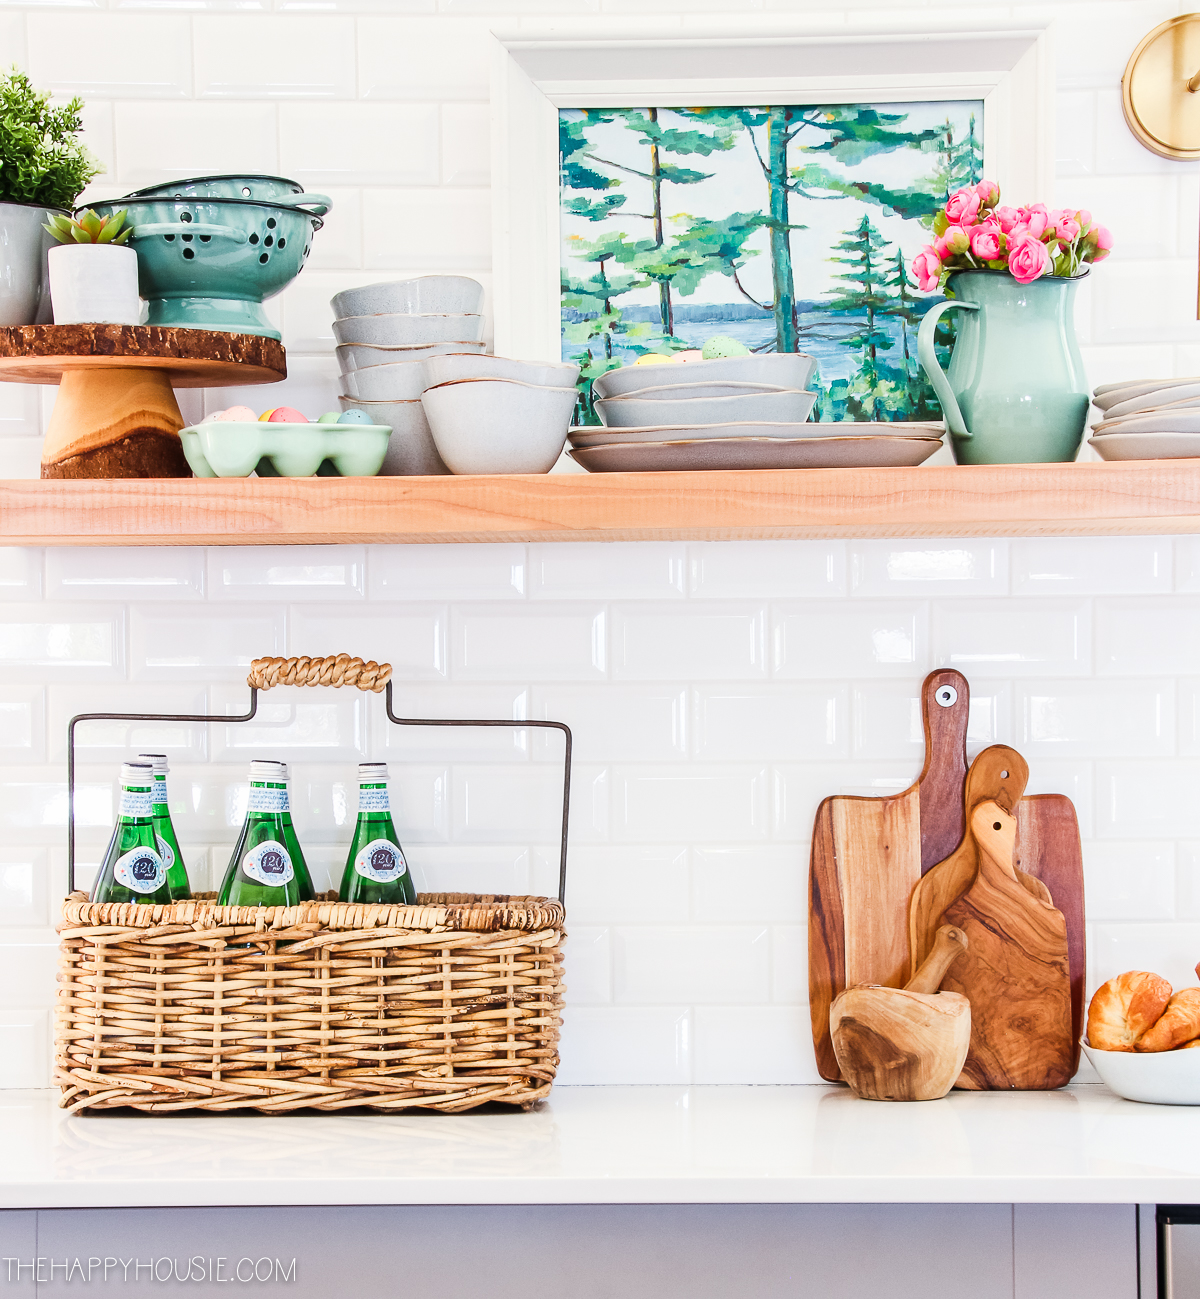 Open shelves in the kitchen with a basket and wooden cutting boards on it.